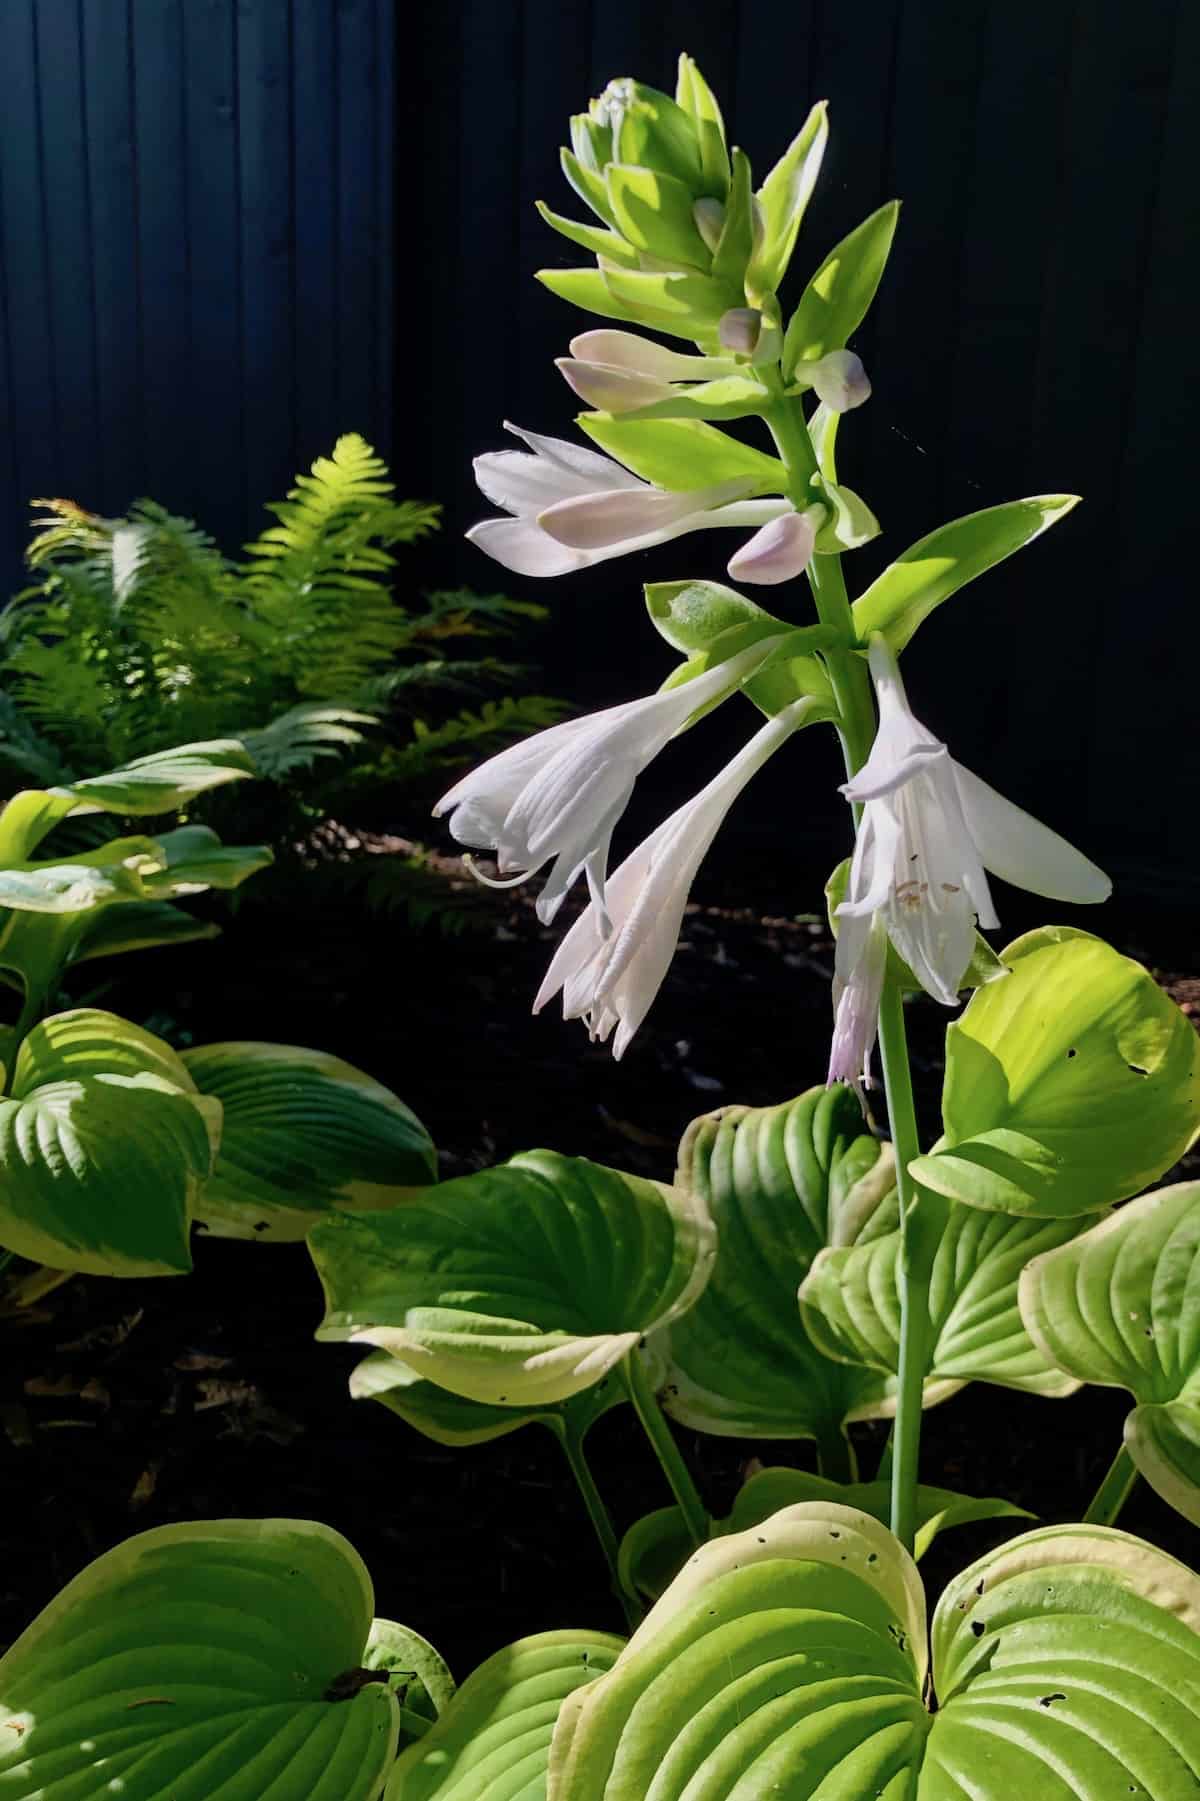 When to cut off hosta plant blooms